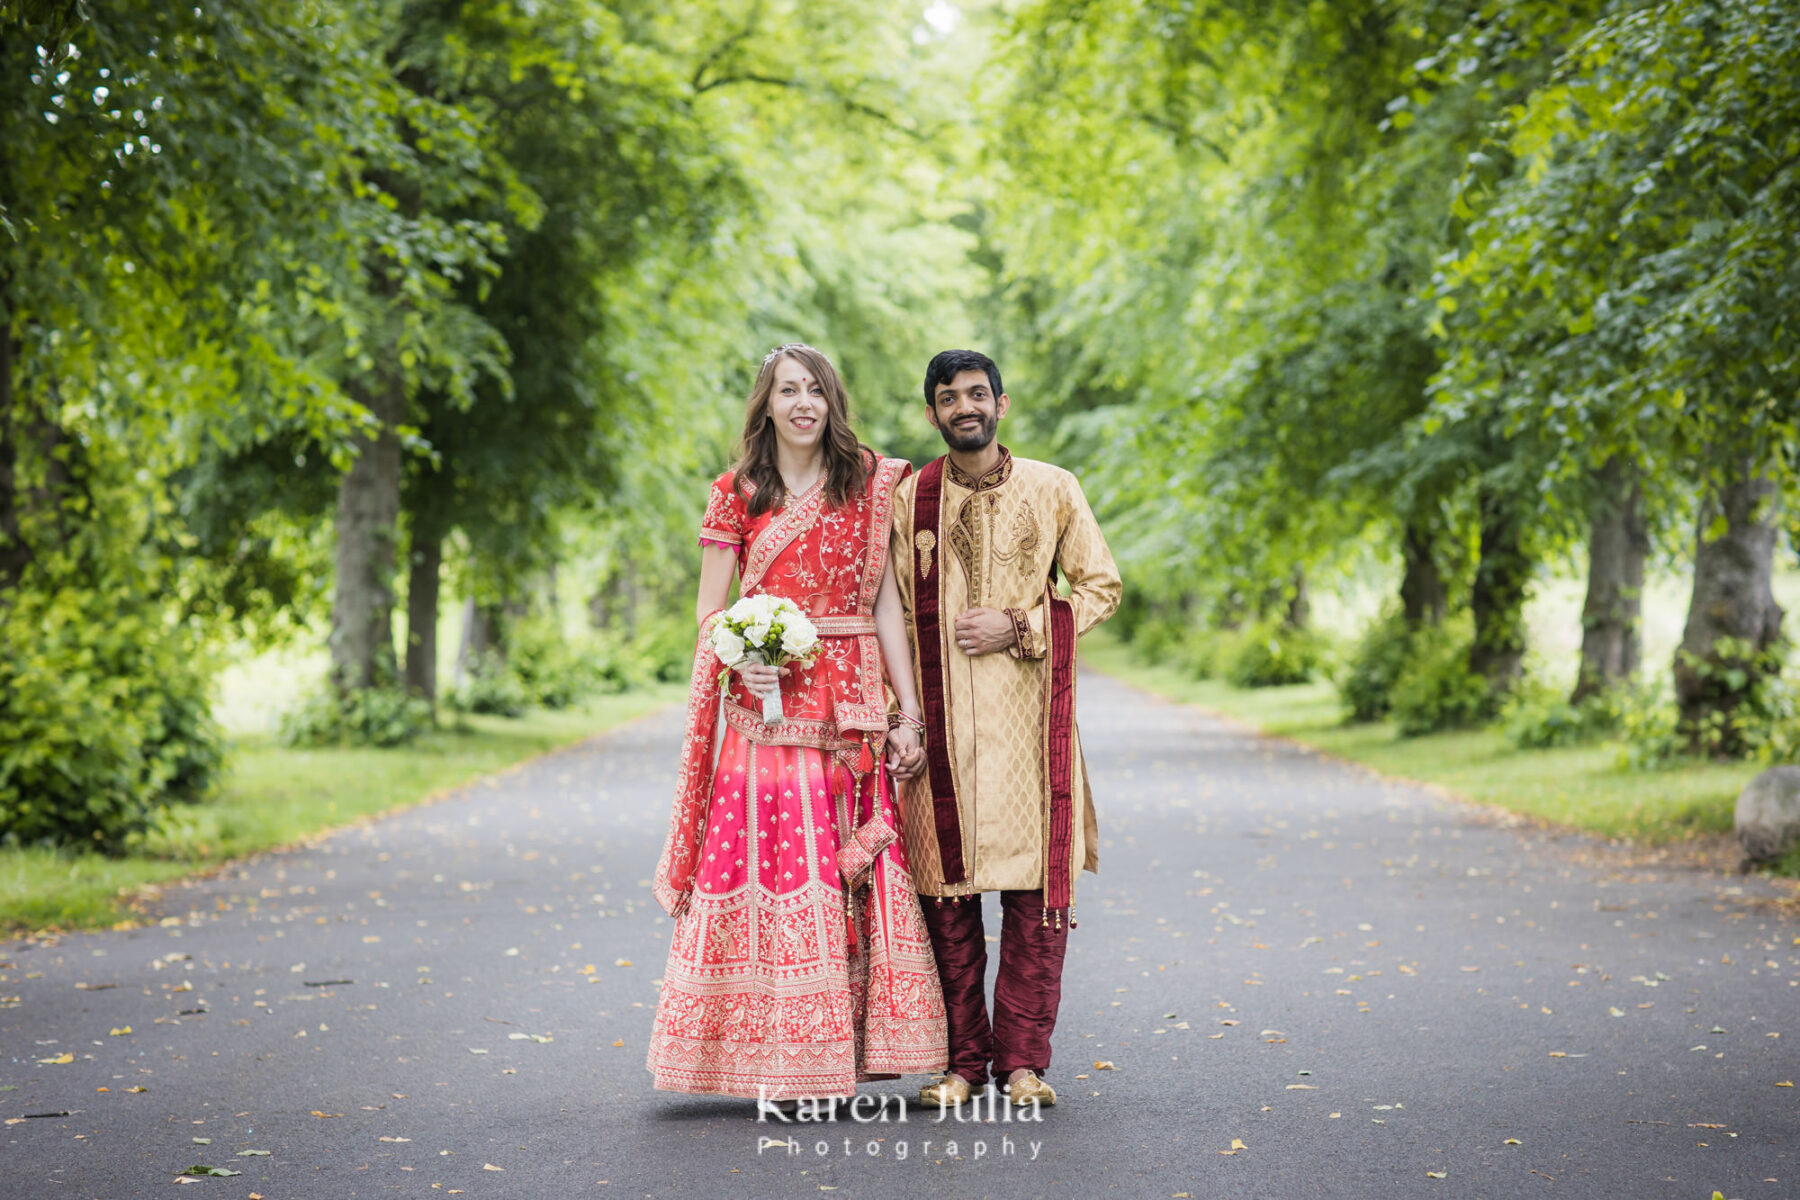 bride and groom pose for a portrait in one of the tree lined walkways at Bellahouston Park